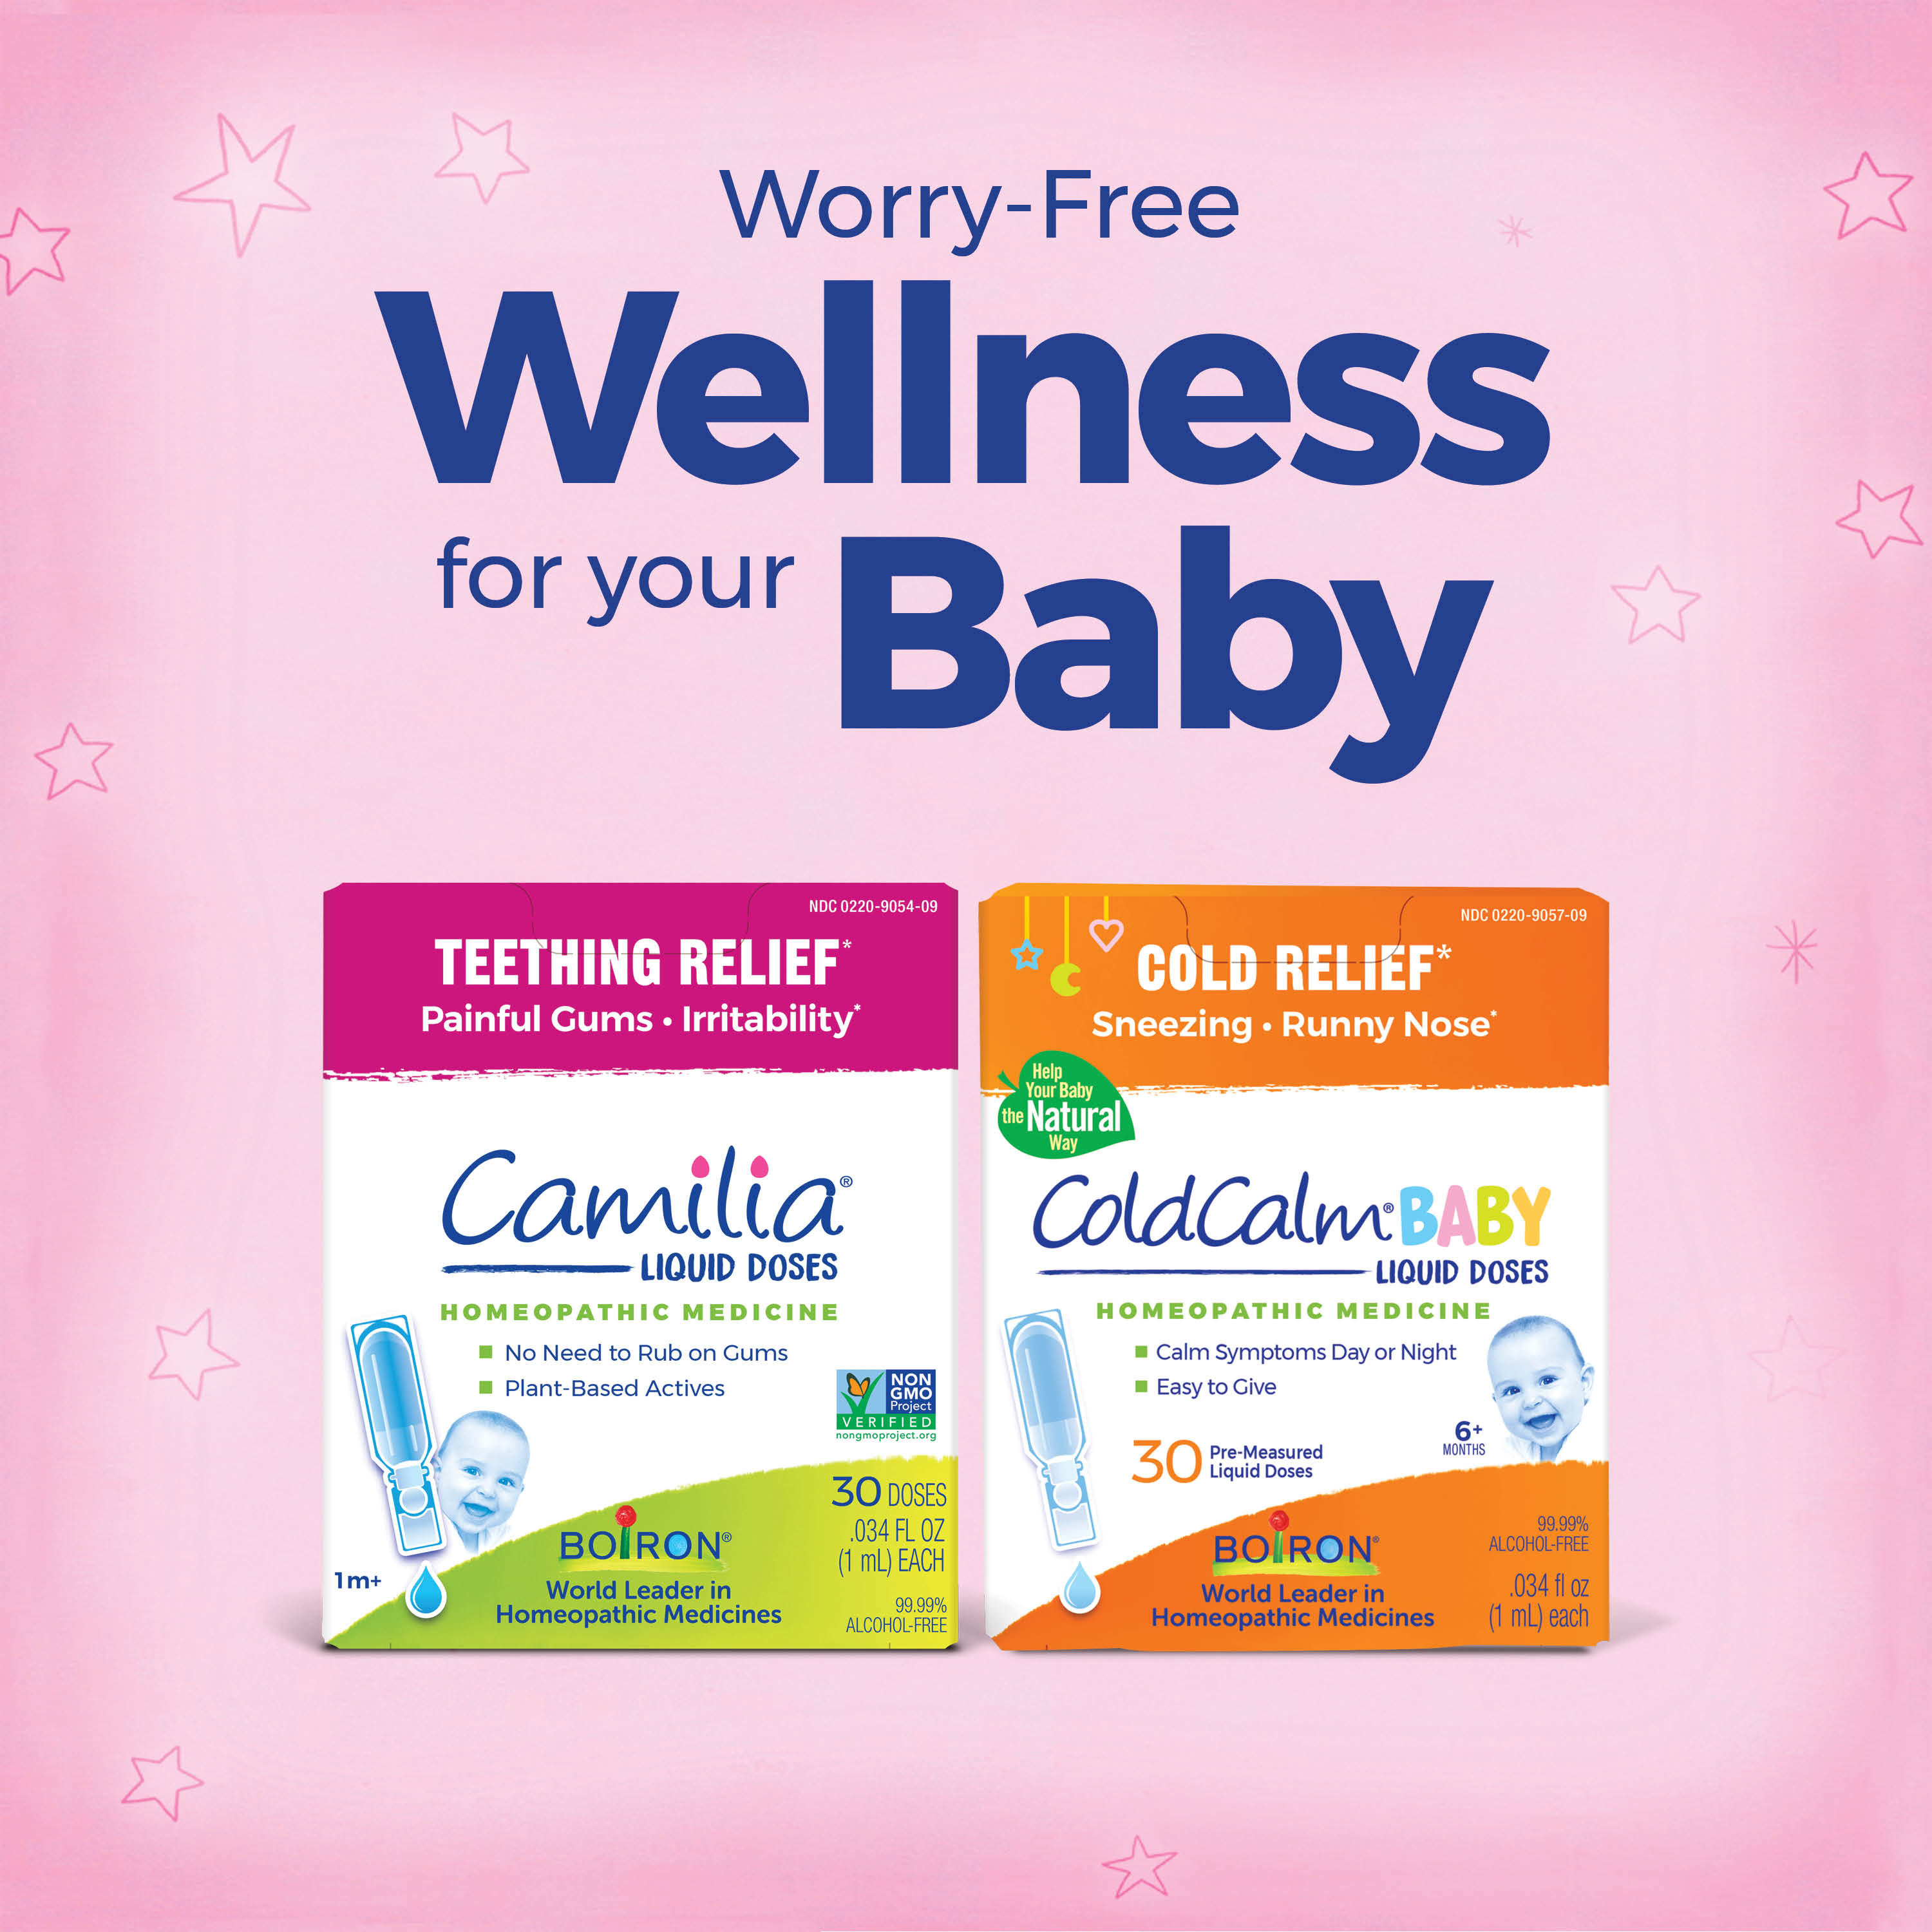 Boiron Camilia, Homeopathic Medicine for Teething Relief, 30 Single Liquid Doses - image 11 of 11